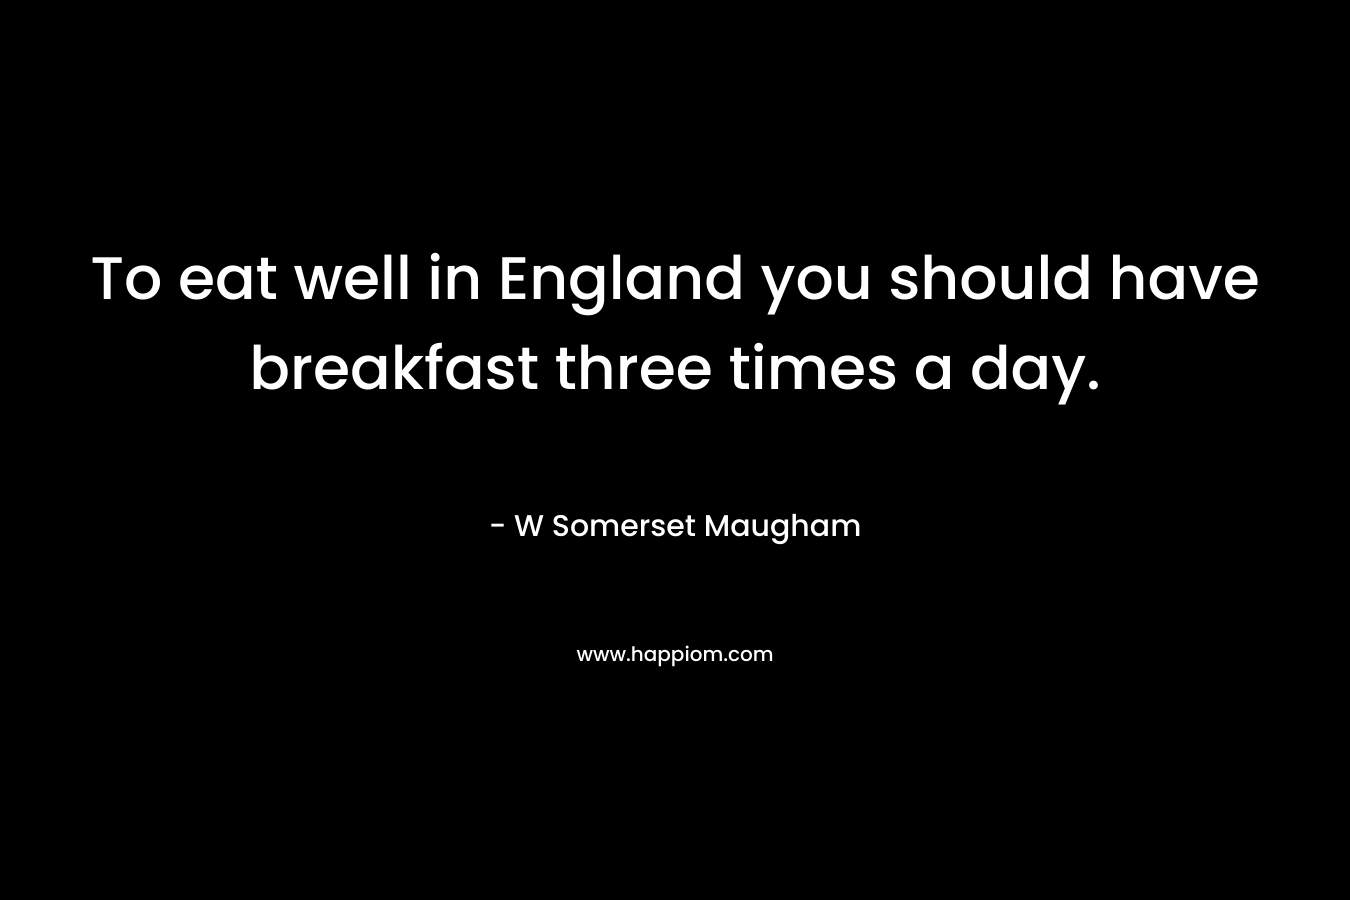 To eat well in England you should have breakfast three times a day.